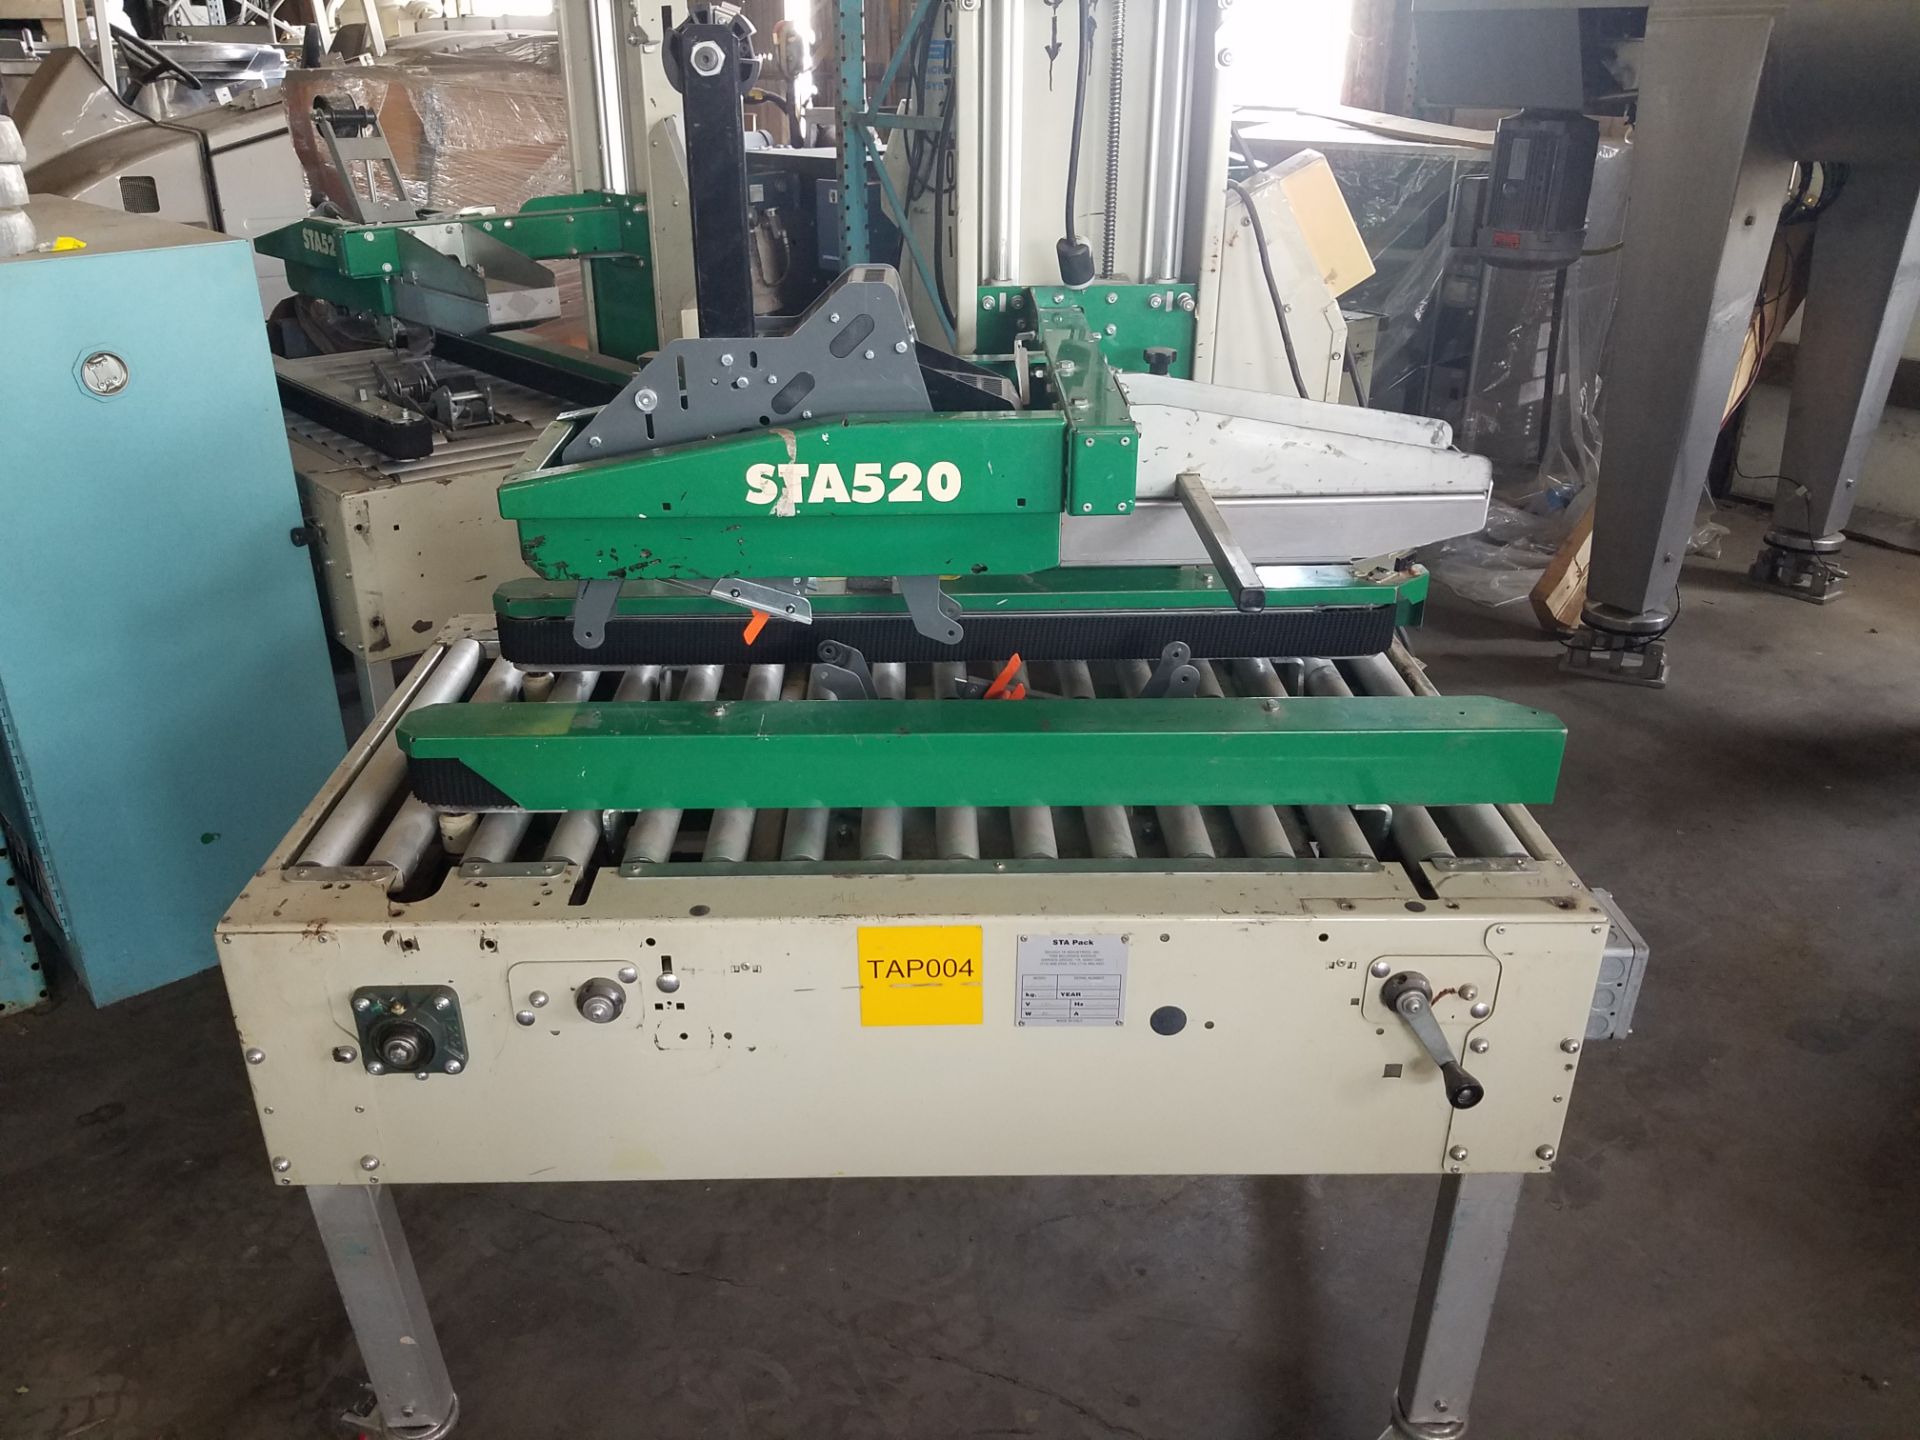 STA520 Top and Bottom Case Sealer, S/N AZ026360, Yr. 2005, 115 Volt, 2-Heads, Casters (Located